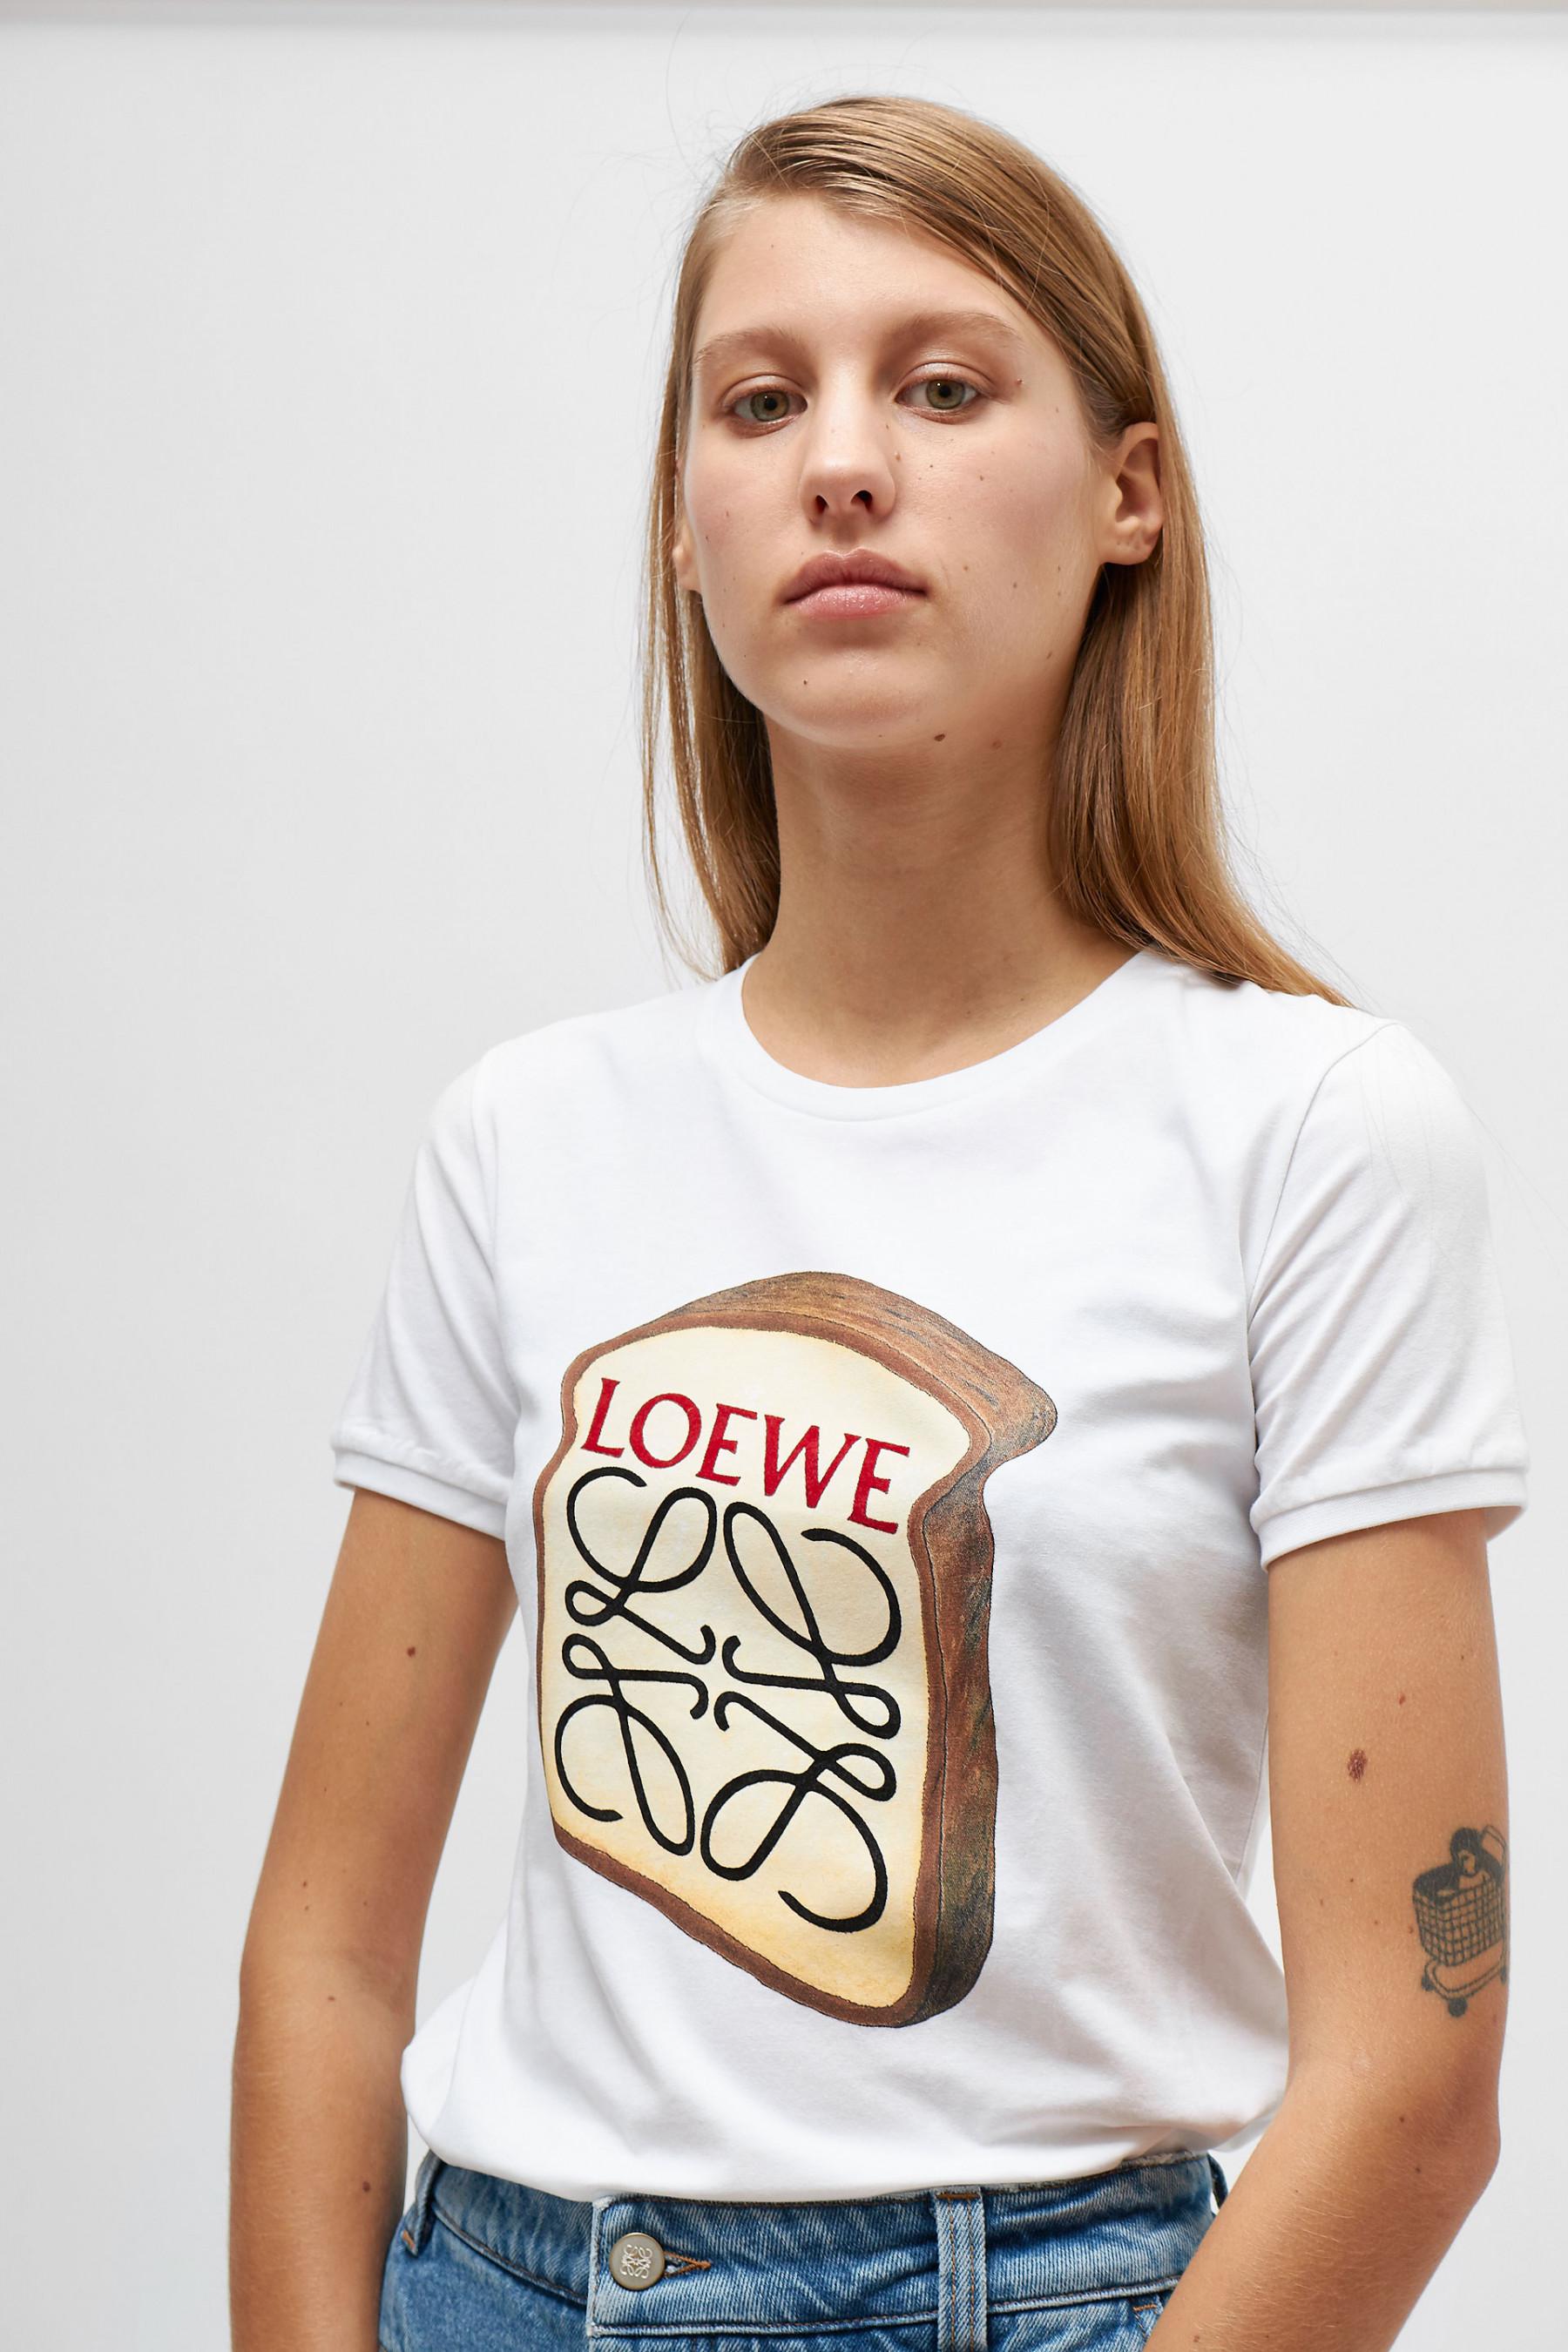 Loewe Cotton Toast T-shirt in White for 